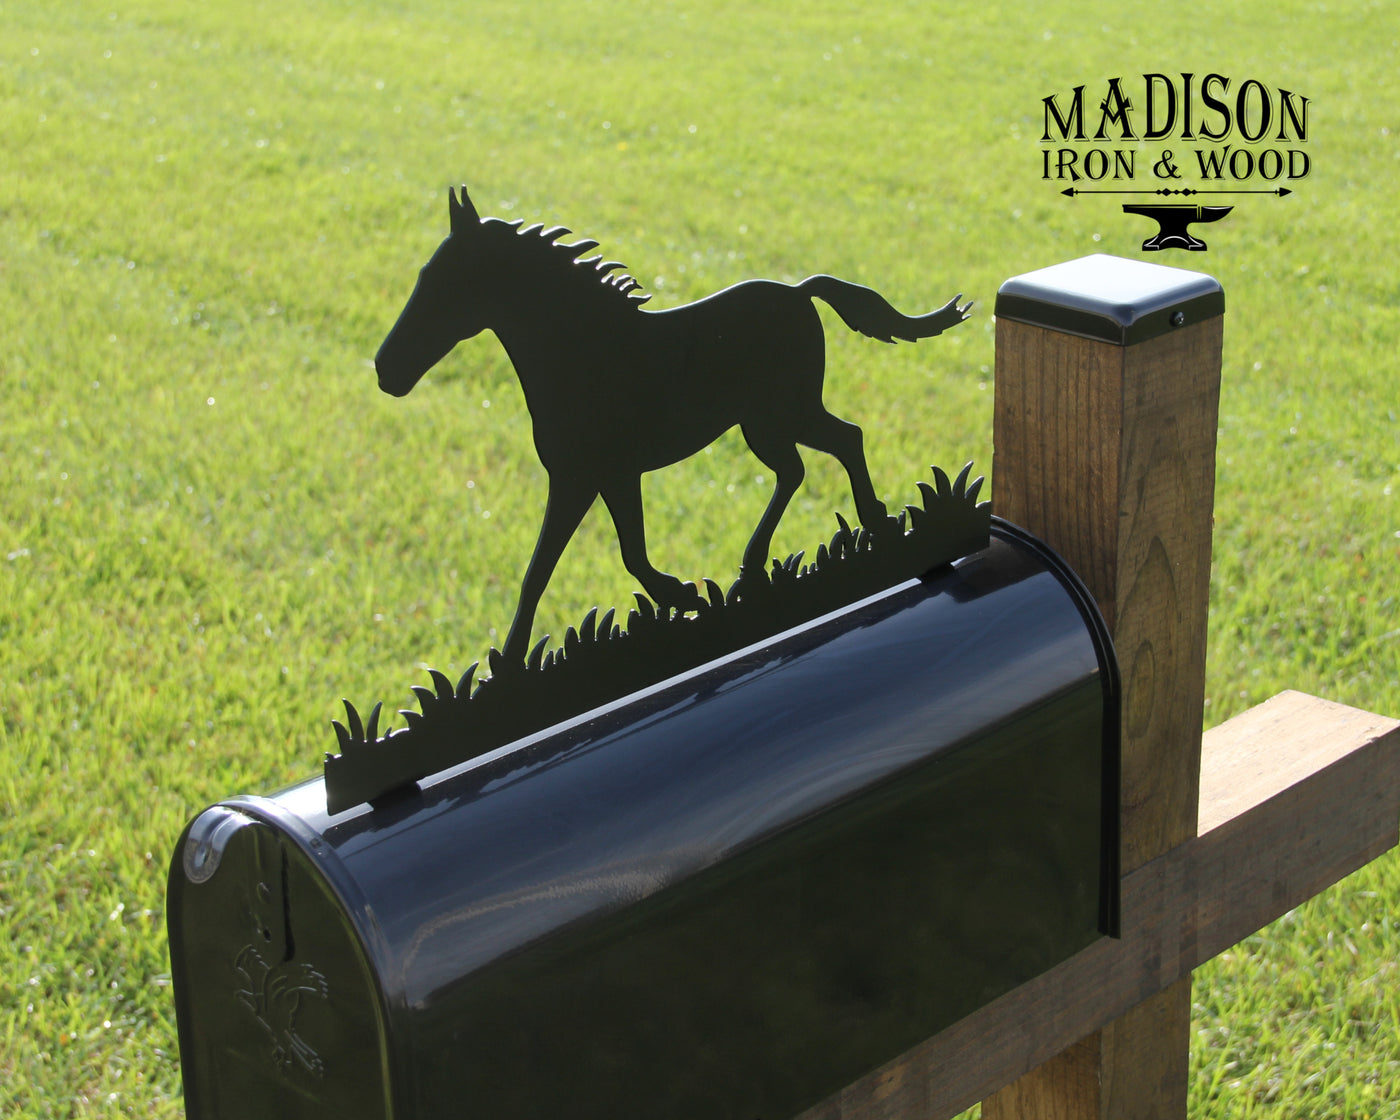 Horse Mailbox Topper - Madison Iron and Wood - Mailbox Post Decor - metal outdoor decor - Steel deocrations - american made products - veteran owned business products - fencing decorations - fencing supplies - custom wall decorations - personalized wall signs - steel - decorative post caps - steel post caps - metal post caps - brackets - structural brackets - home improvement - easter - easter decorations - easter gift - easter yard decor